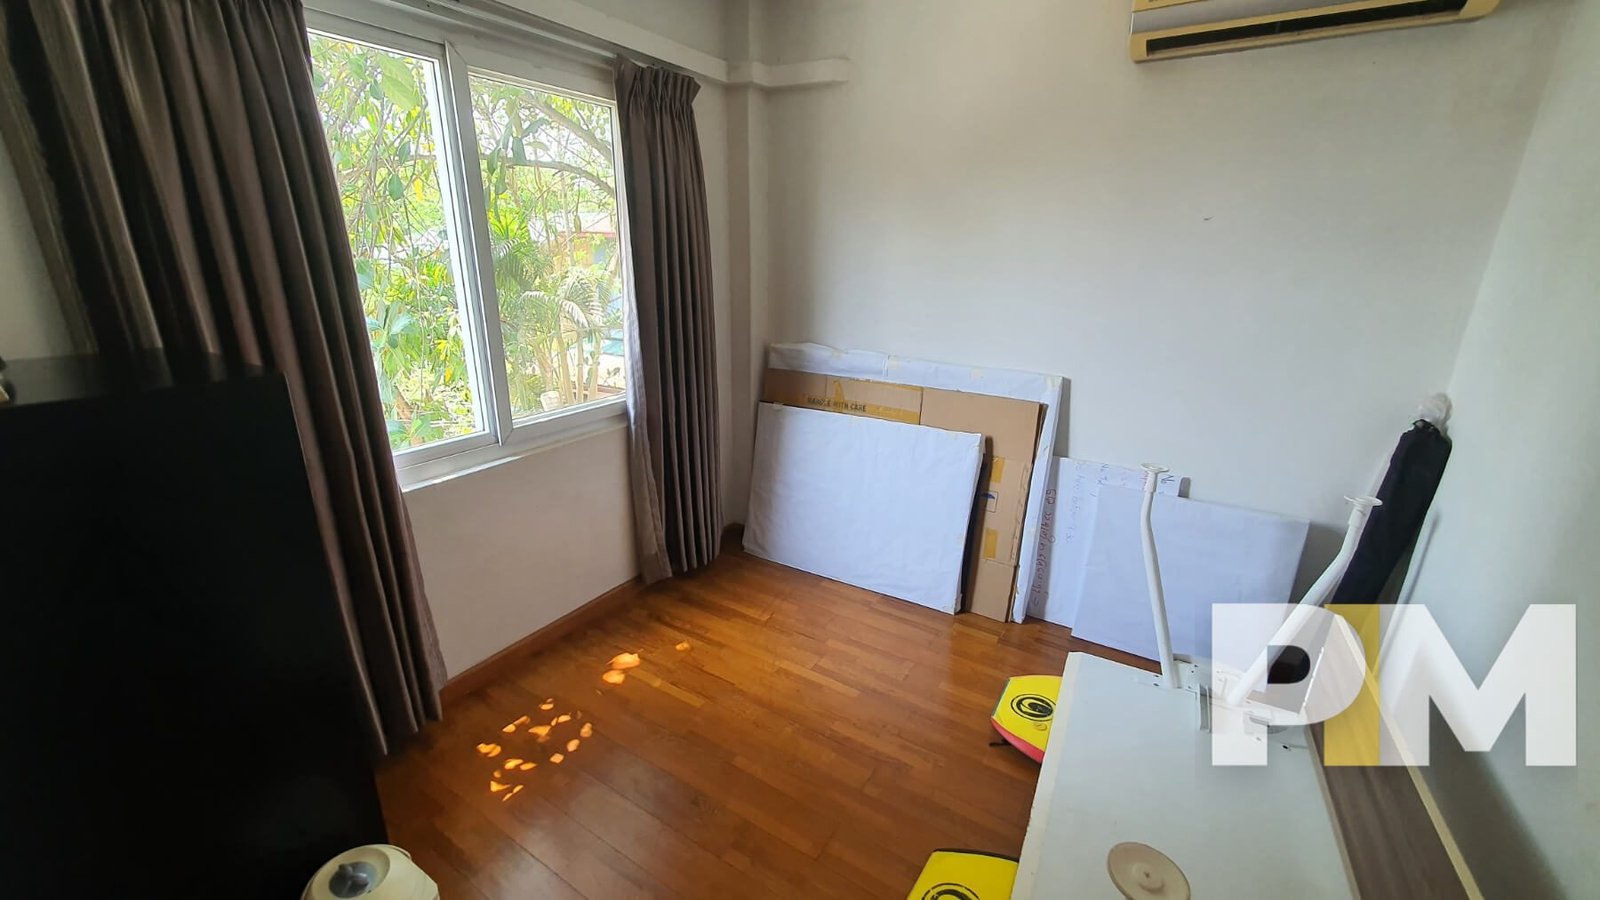 working room with table - Yangon Real Estate